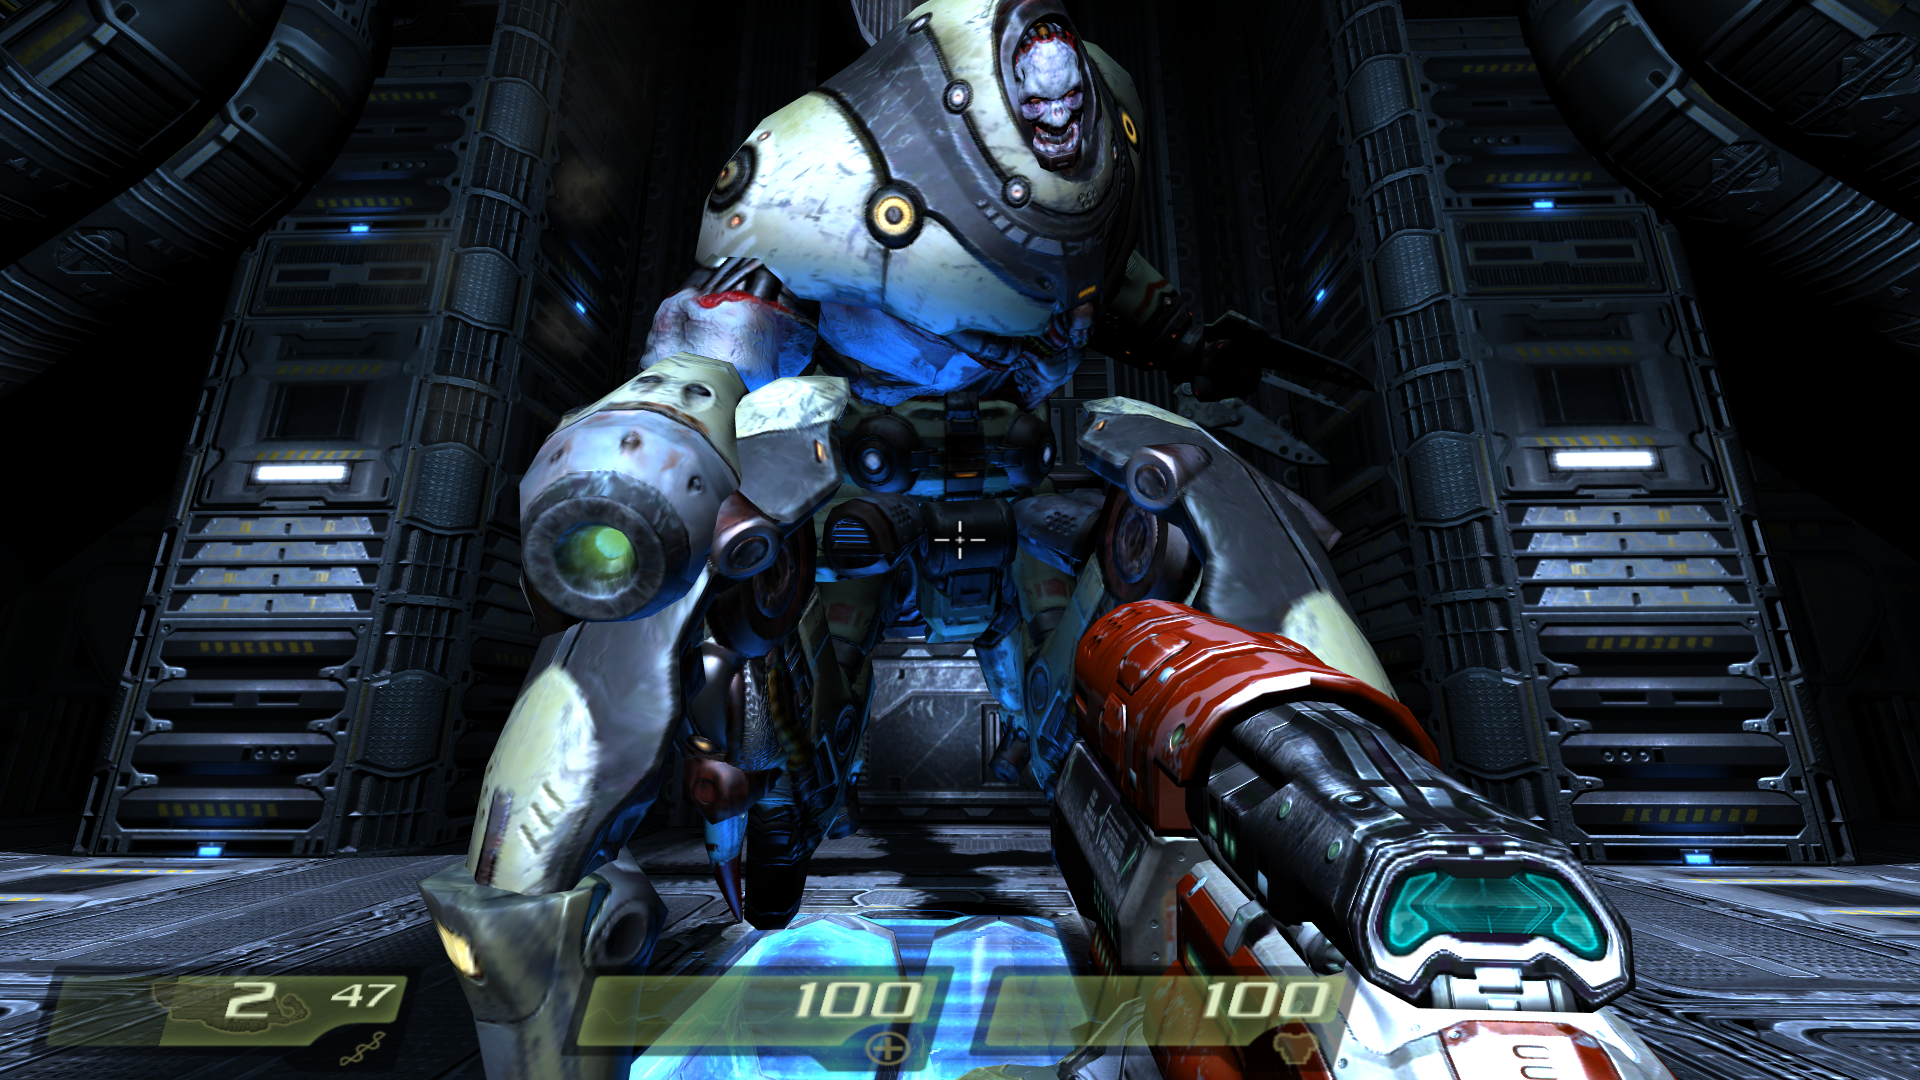 First-person screenshot of the first Makron fight from Quake 4.